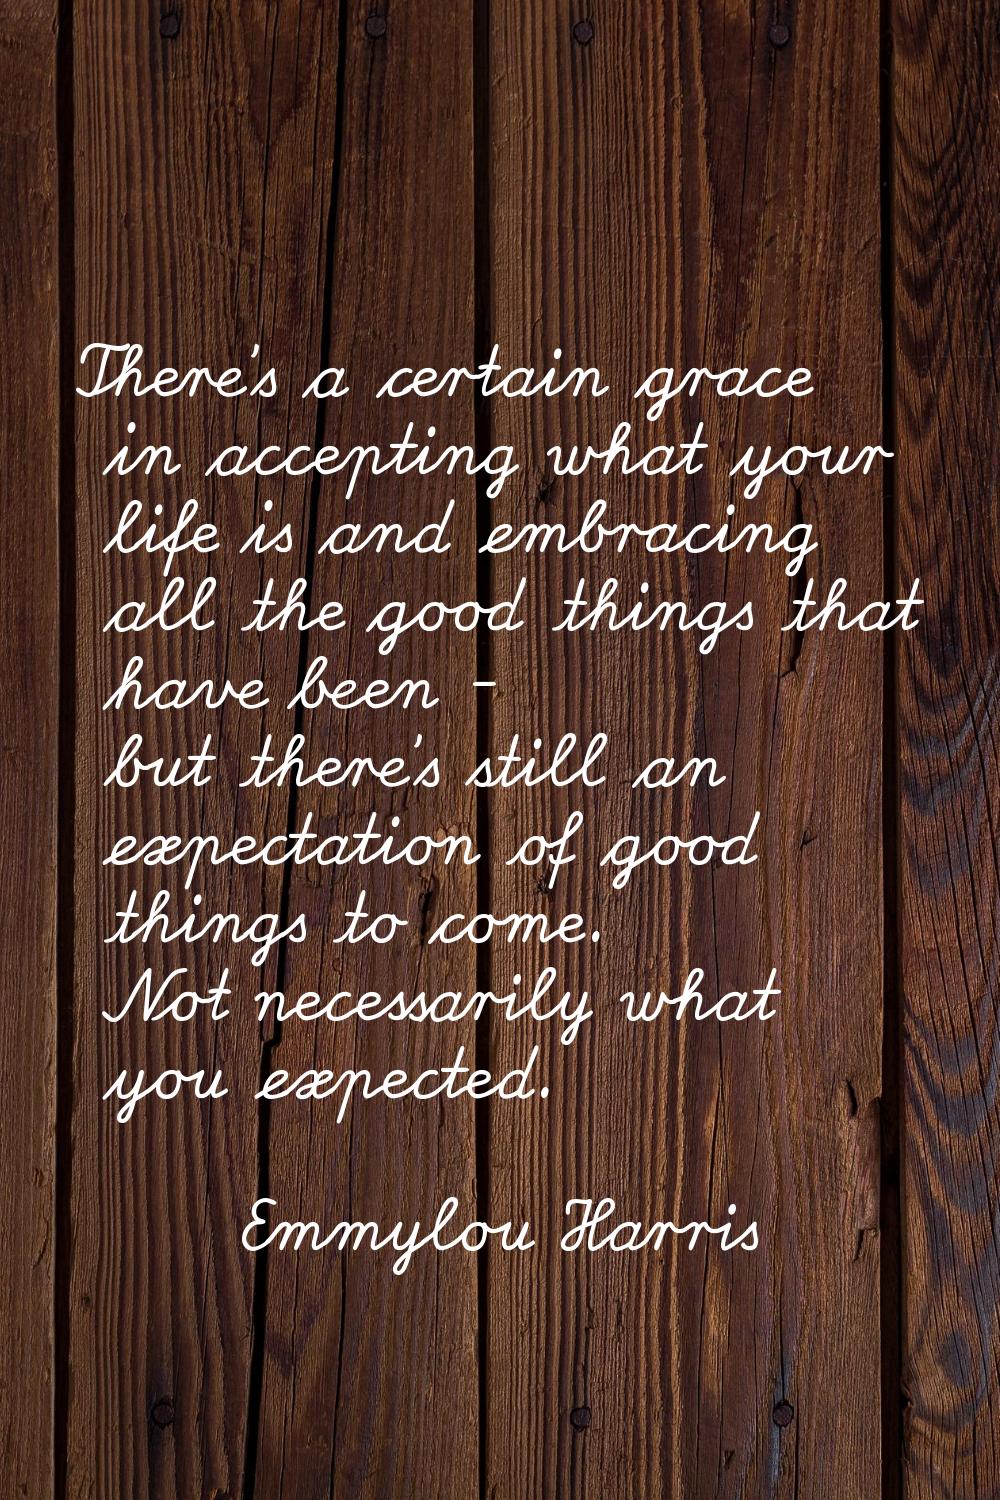 There's a certain grace in accepting what your life is and embracing all the good things that have 